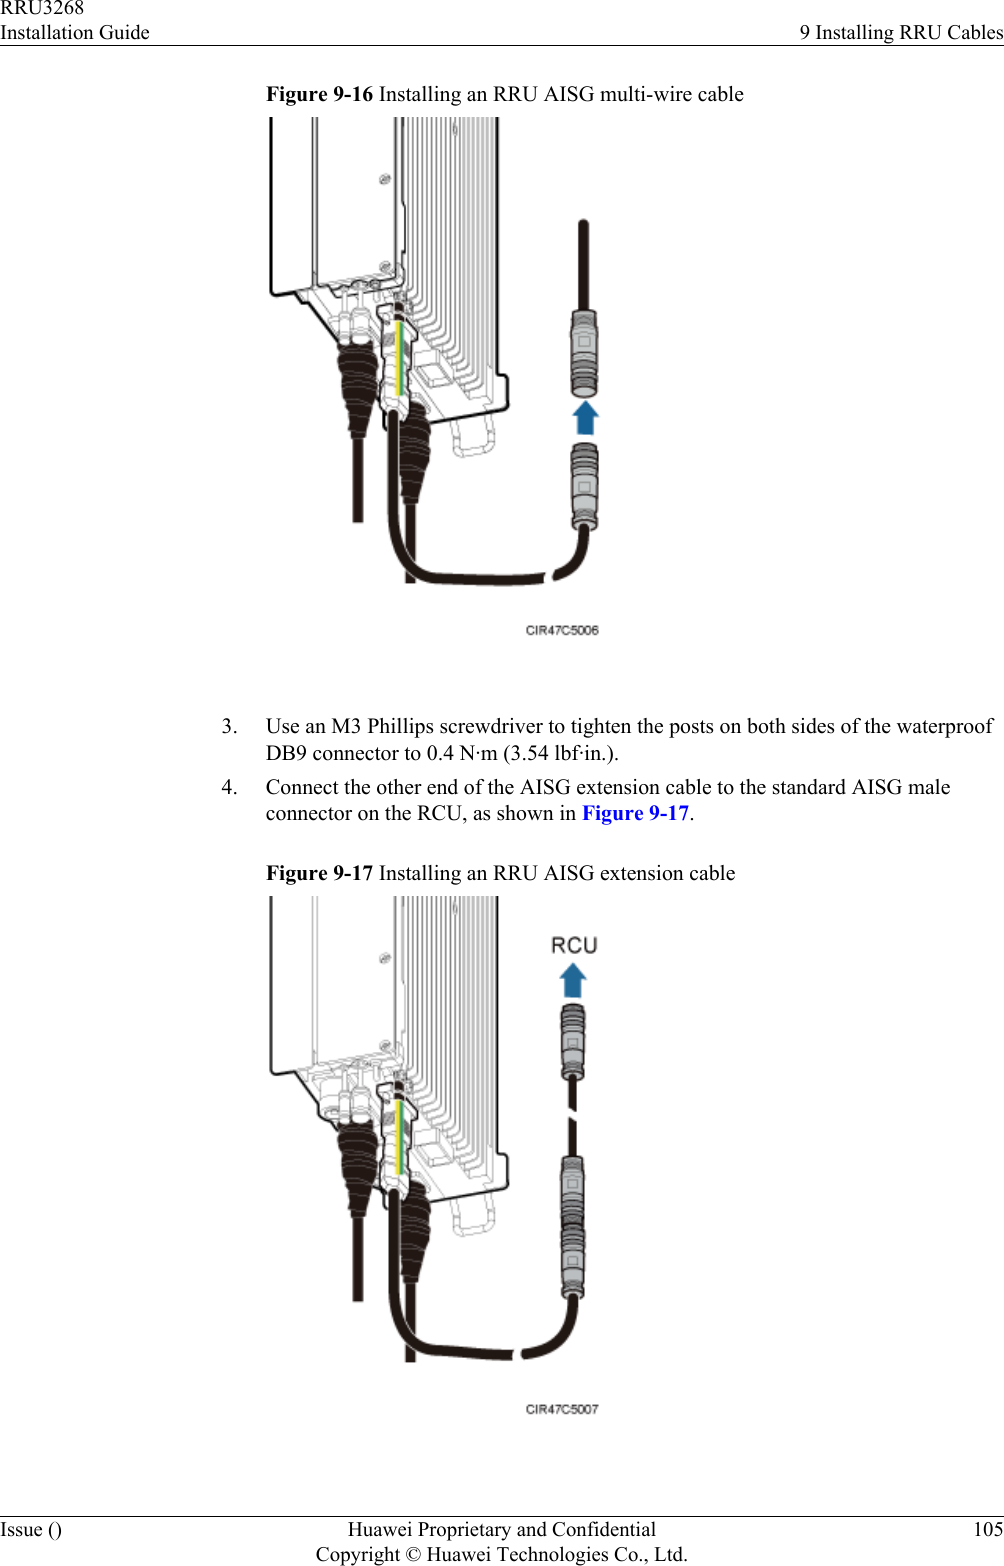 Figure 9-16 Installing an RRU AISG multi-wire cable 3. Use an M3 Phillips screwdriver to tighten the posts on both sides of the waterproofDB9 connector to 0.4 N·m (3.54 lbf·in.).4. Connect the other end of the AISG extension cable to the standard AISG maleconnector on the RCU, as shown in Figure 9-17.Figure 9-17 Installing an RRU AISG extension cableRRU3268Installation Guide 9 Installing RRU CablesIssue () Huawei Proprietary and ConfidentialCopyright © Huawei Technologies Co., Ltd.105